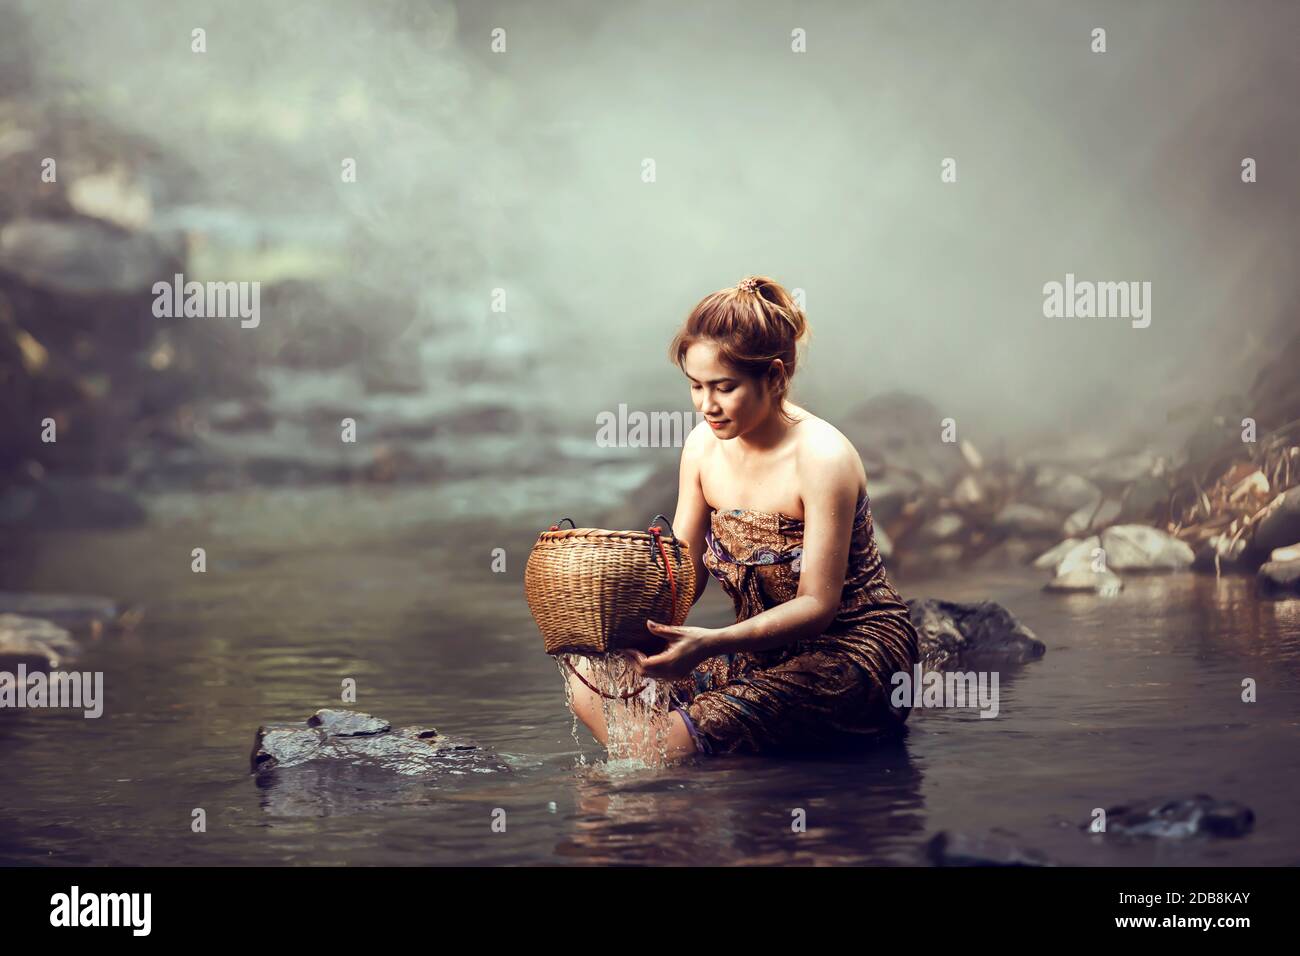 Woman sitting in a river bathing, Thailand Stock Photo